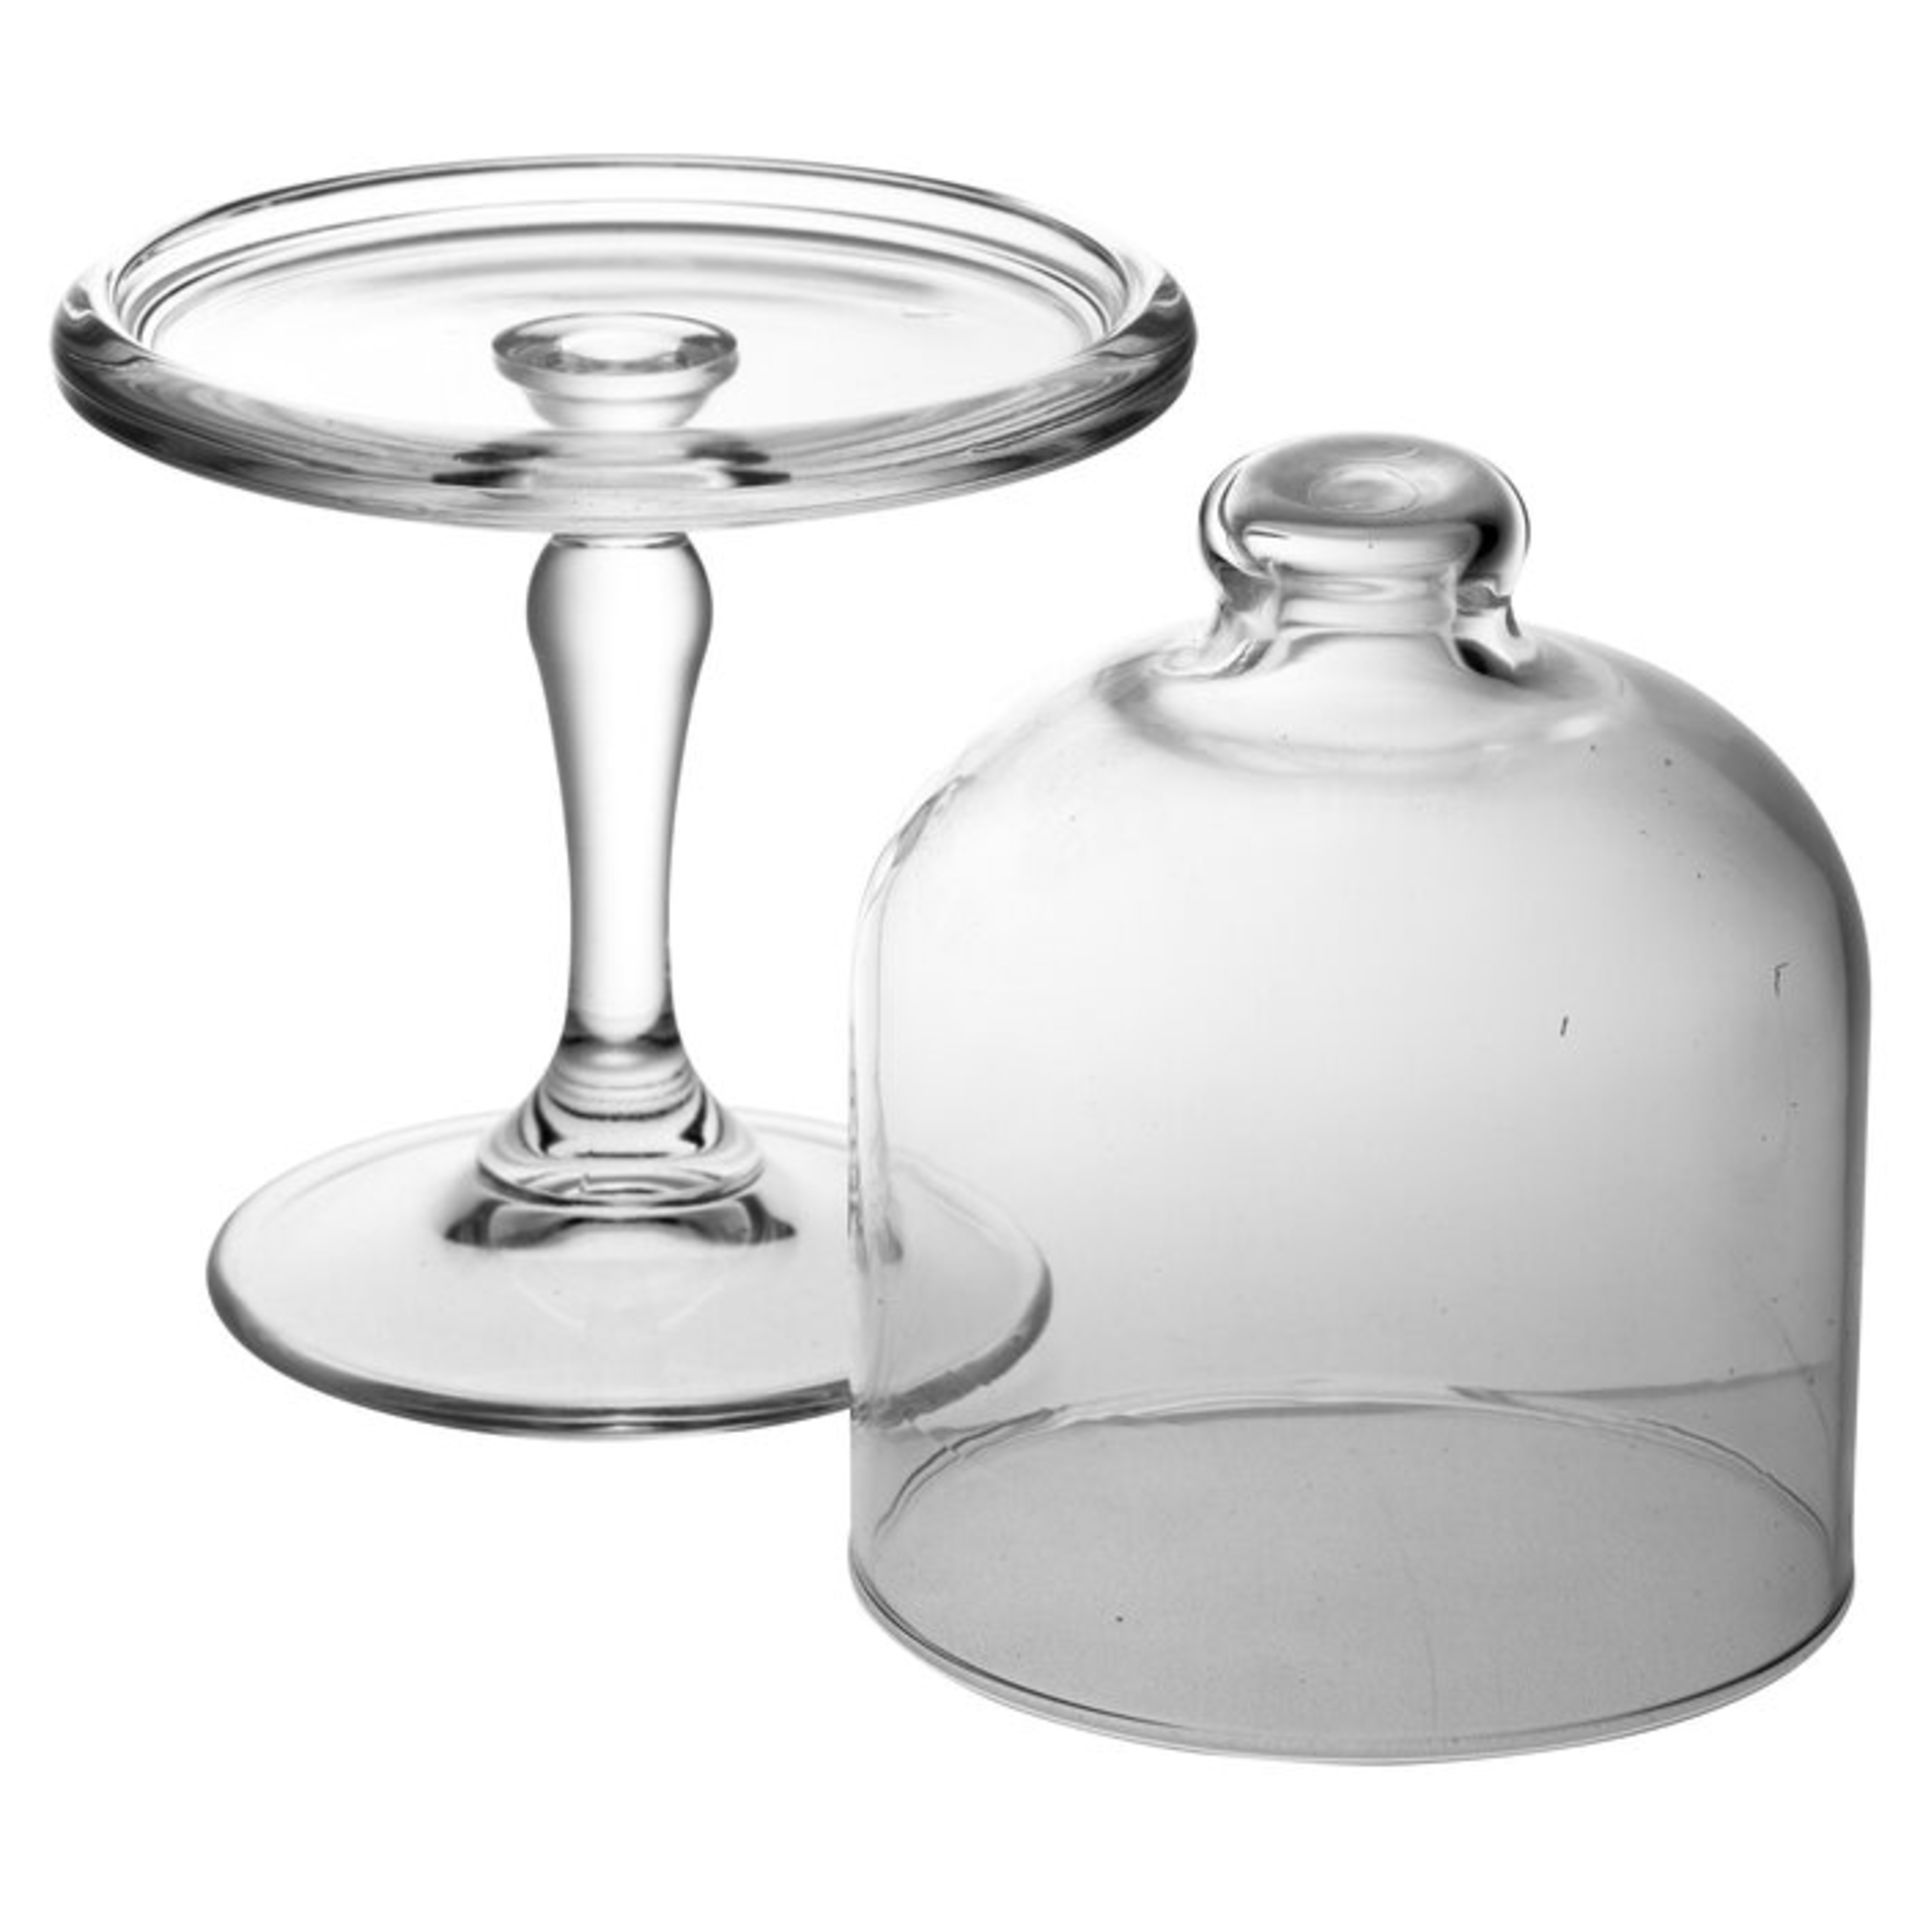 Pasabahce Cake Stand - RRP £12.99 - Image 2 of 3